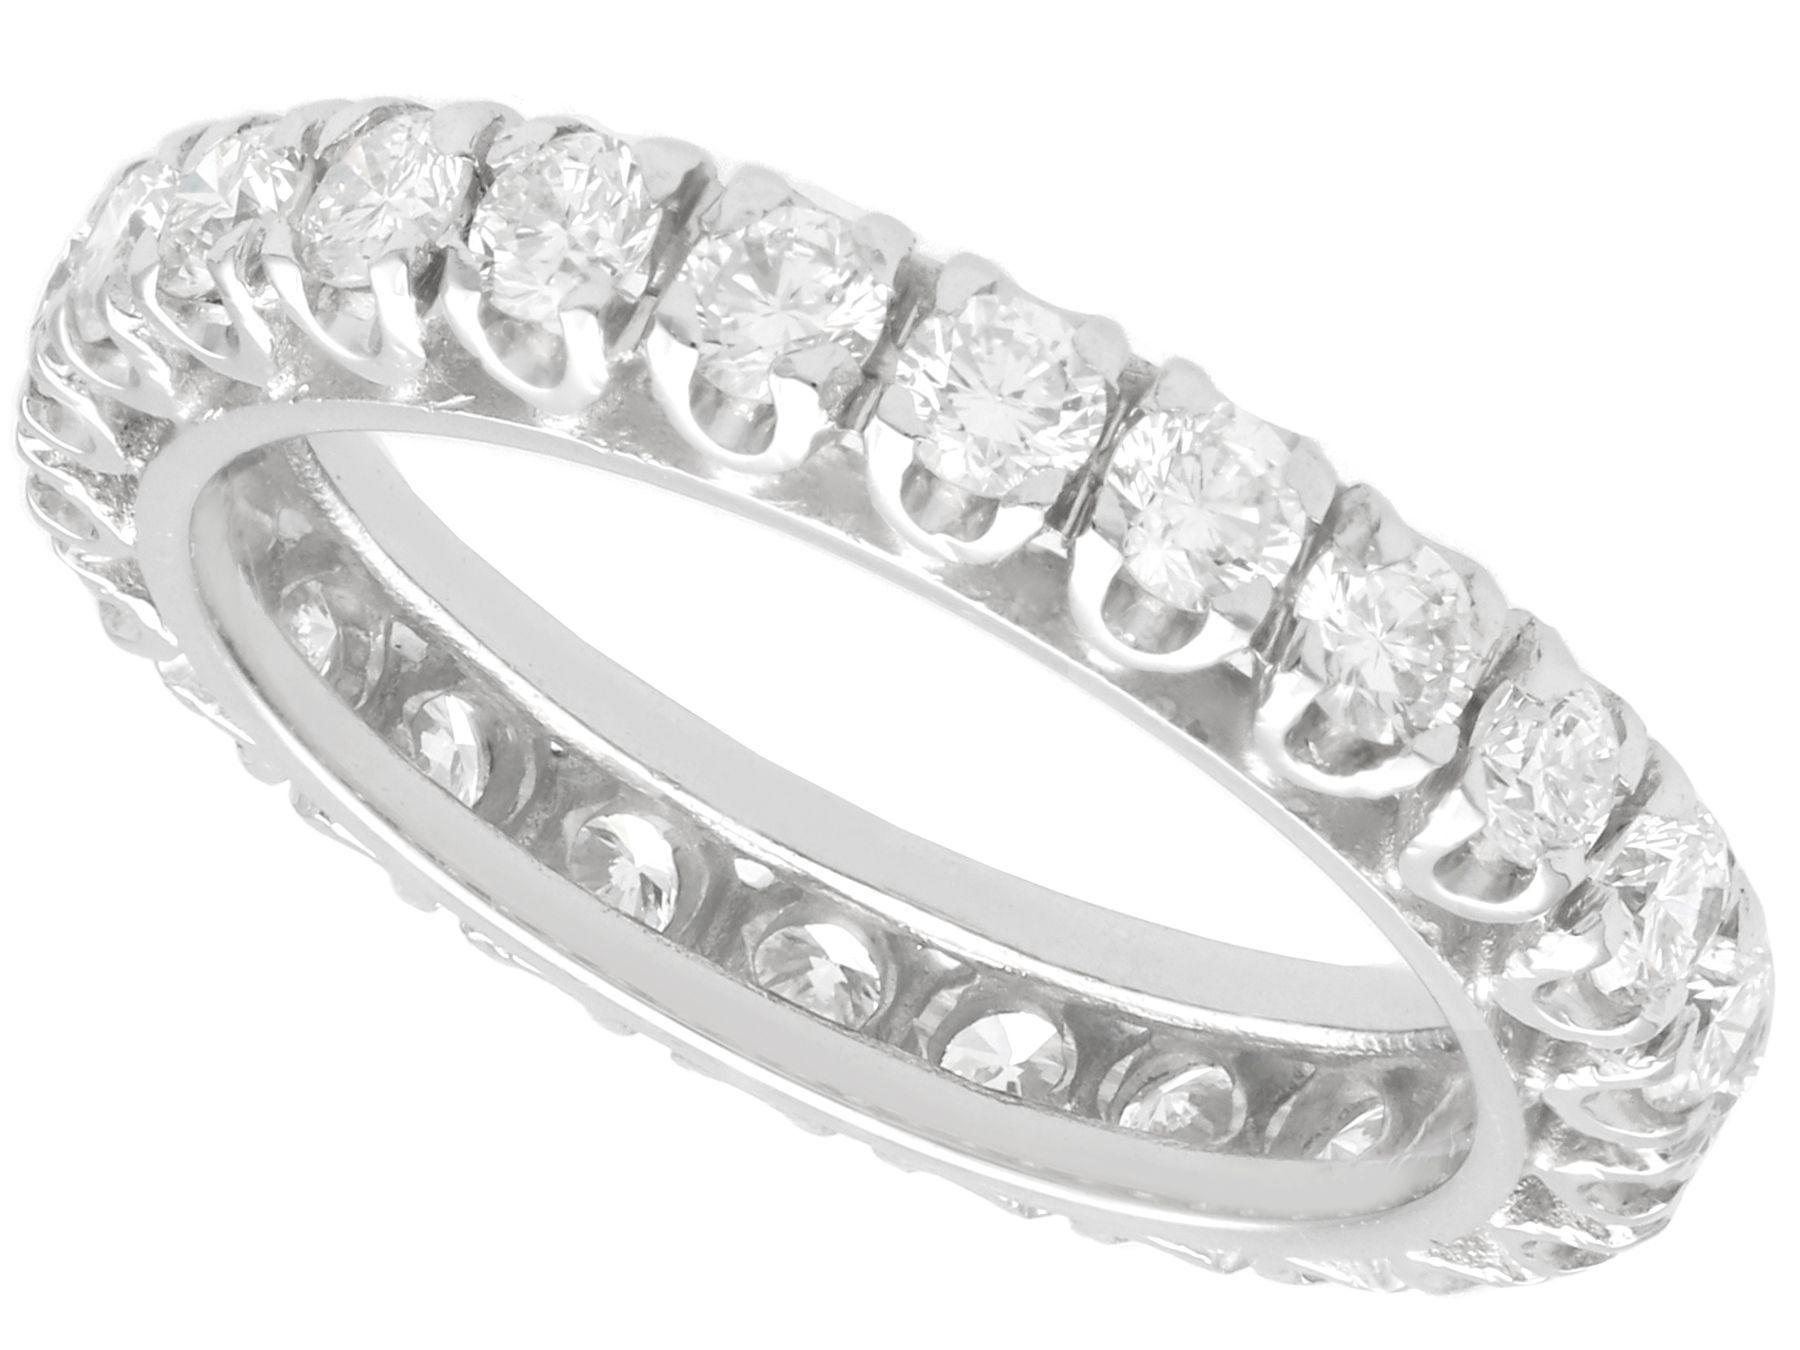 A stunning, fine and impressive vintage 1.50 carat diamond and 14 carat white gold full eternity ring; part of our diverse diamond jewelry and estate jewelry collections.

This fine and impressive vintage diamond ring has been crafted in 14K white